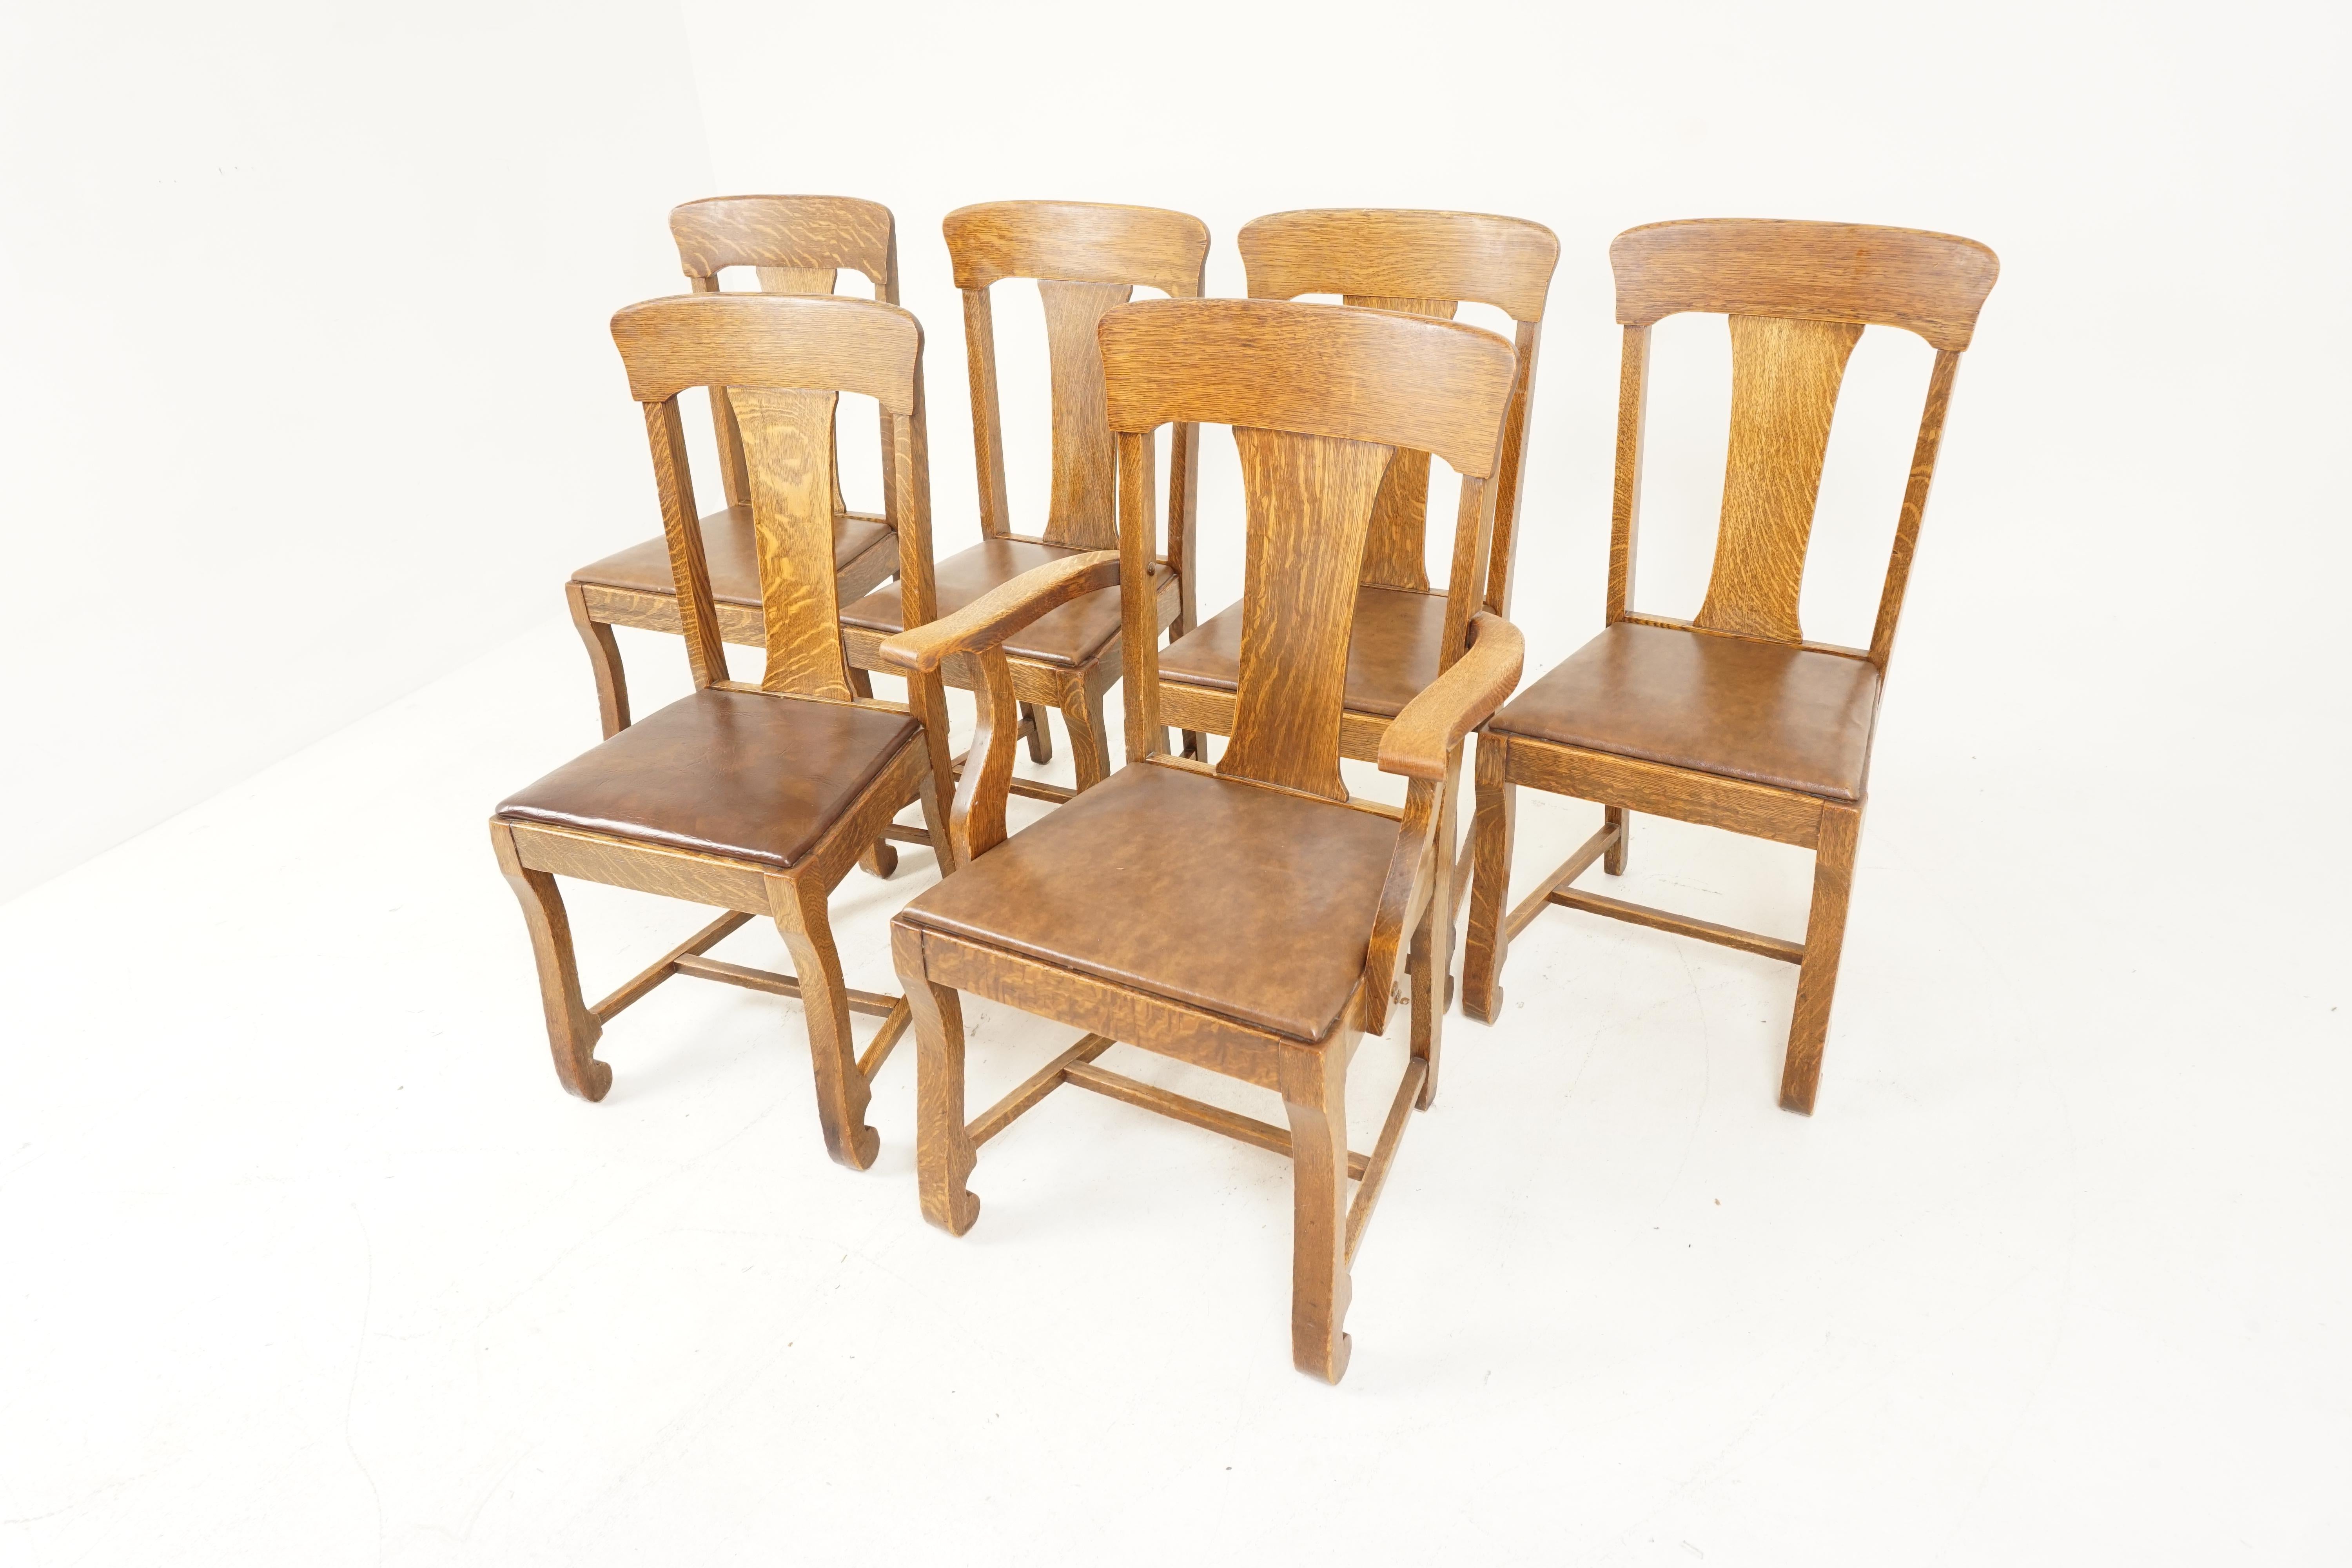 Antique set of chairs, 6 oak upholstered dining chairs, American 1910, B2858

American 1910
Solid oak
Original finish
Shaped top rail
Single slat to the back
Upholstered seat
All standing on shaped front legs
Joined by an h stretcher to the